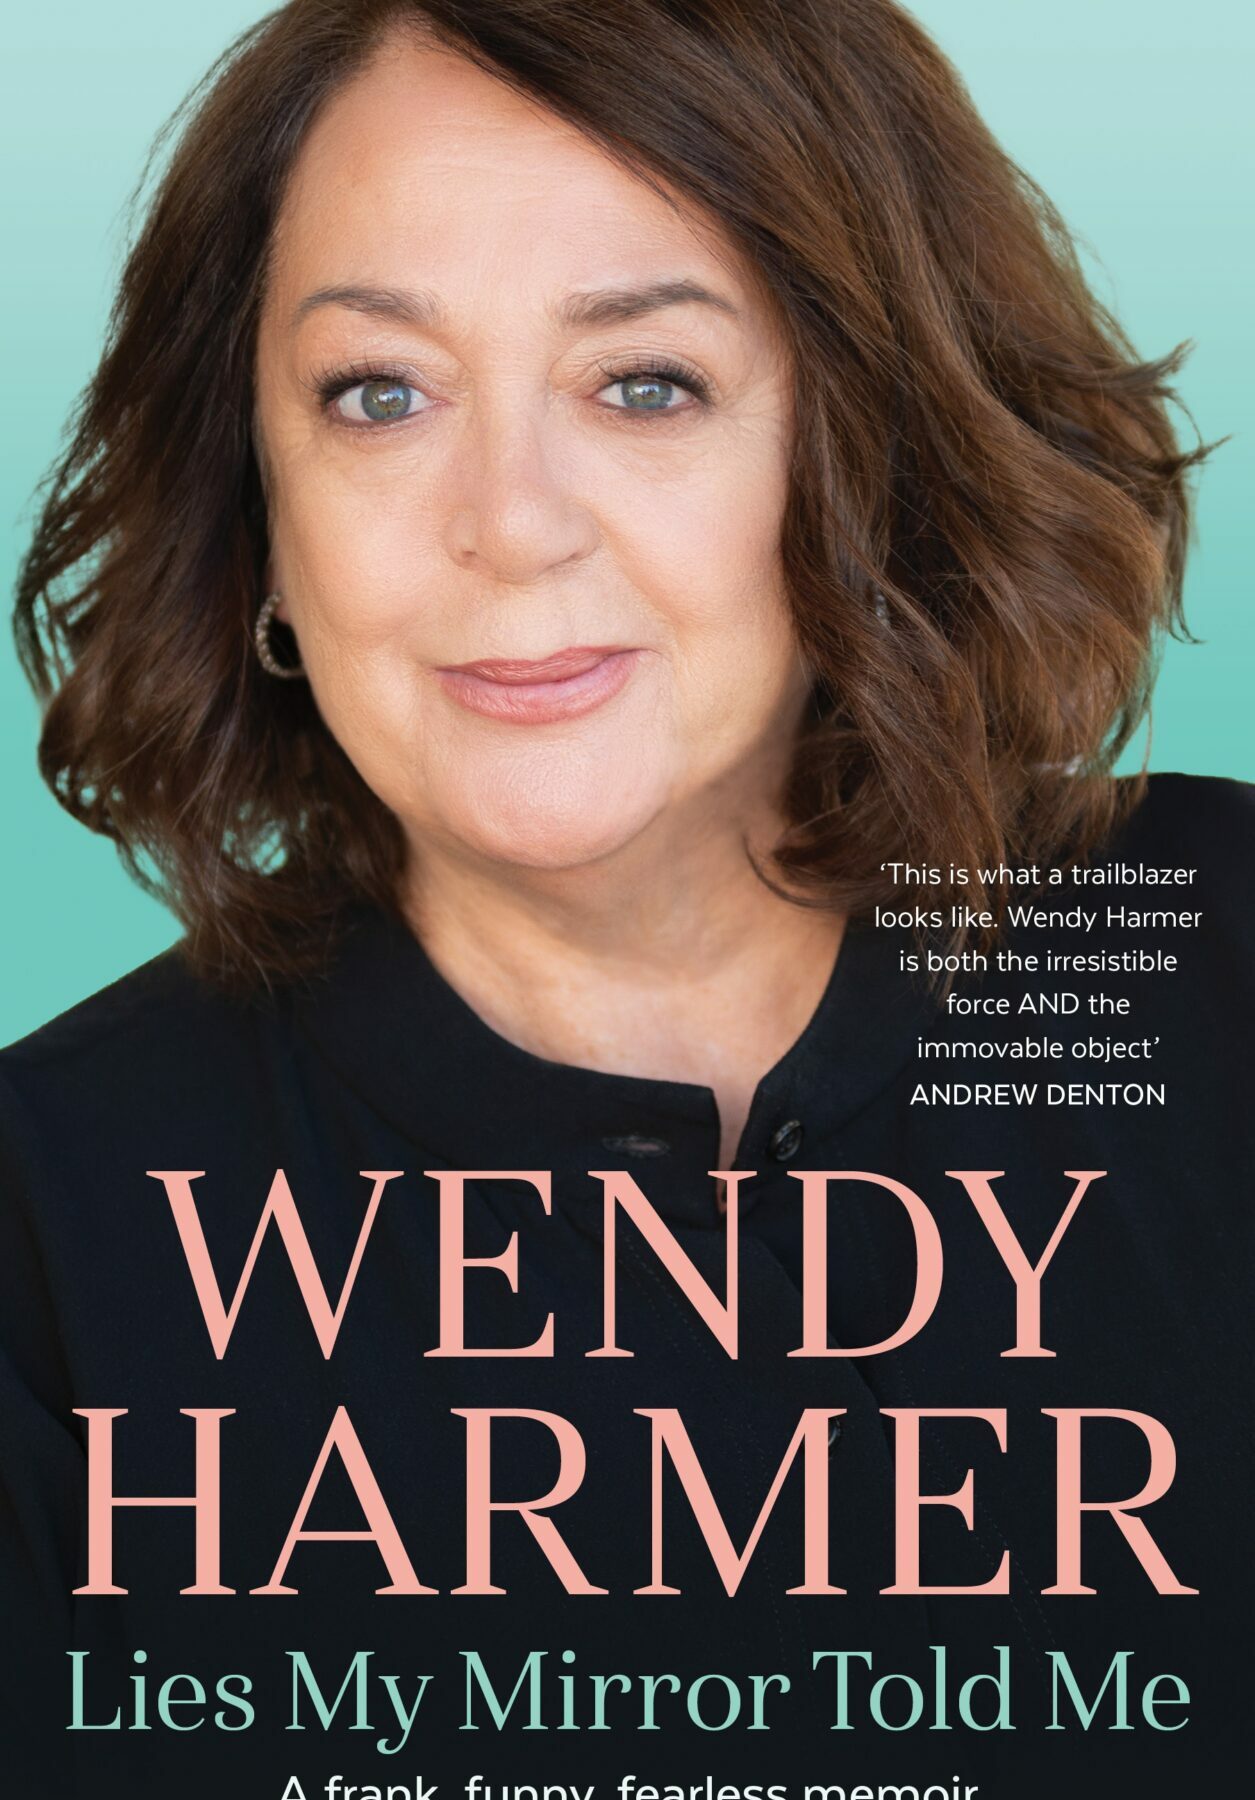 A book cover featuring a photograph of Wendy Harmer in a navy blouse with her name in large pink letters in the bottom half of the page and the title in blue underneath